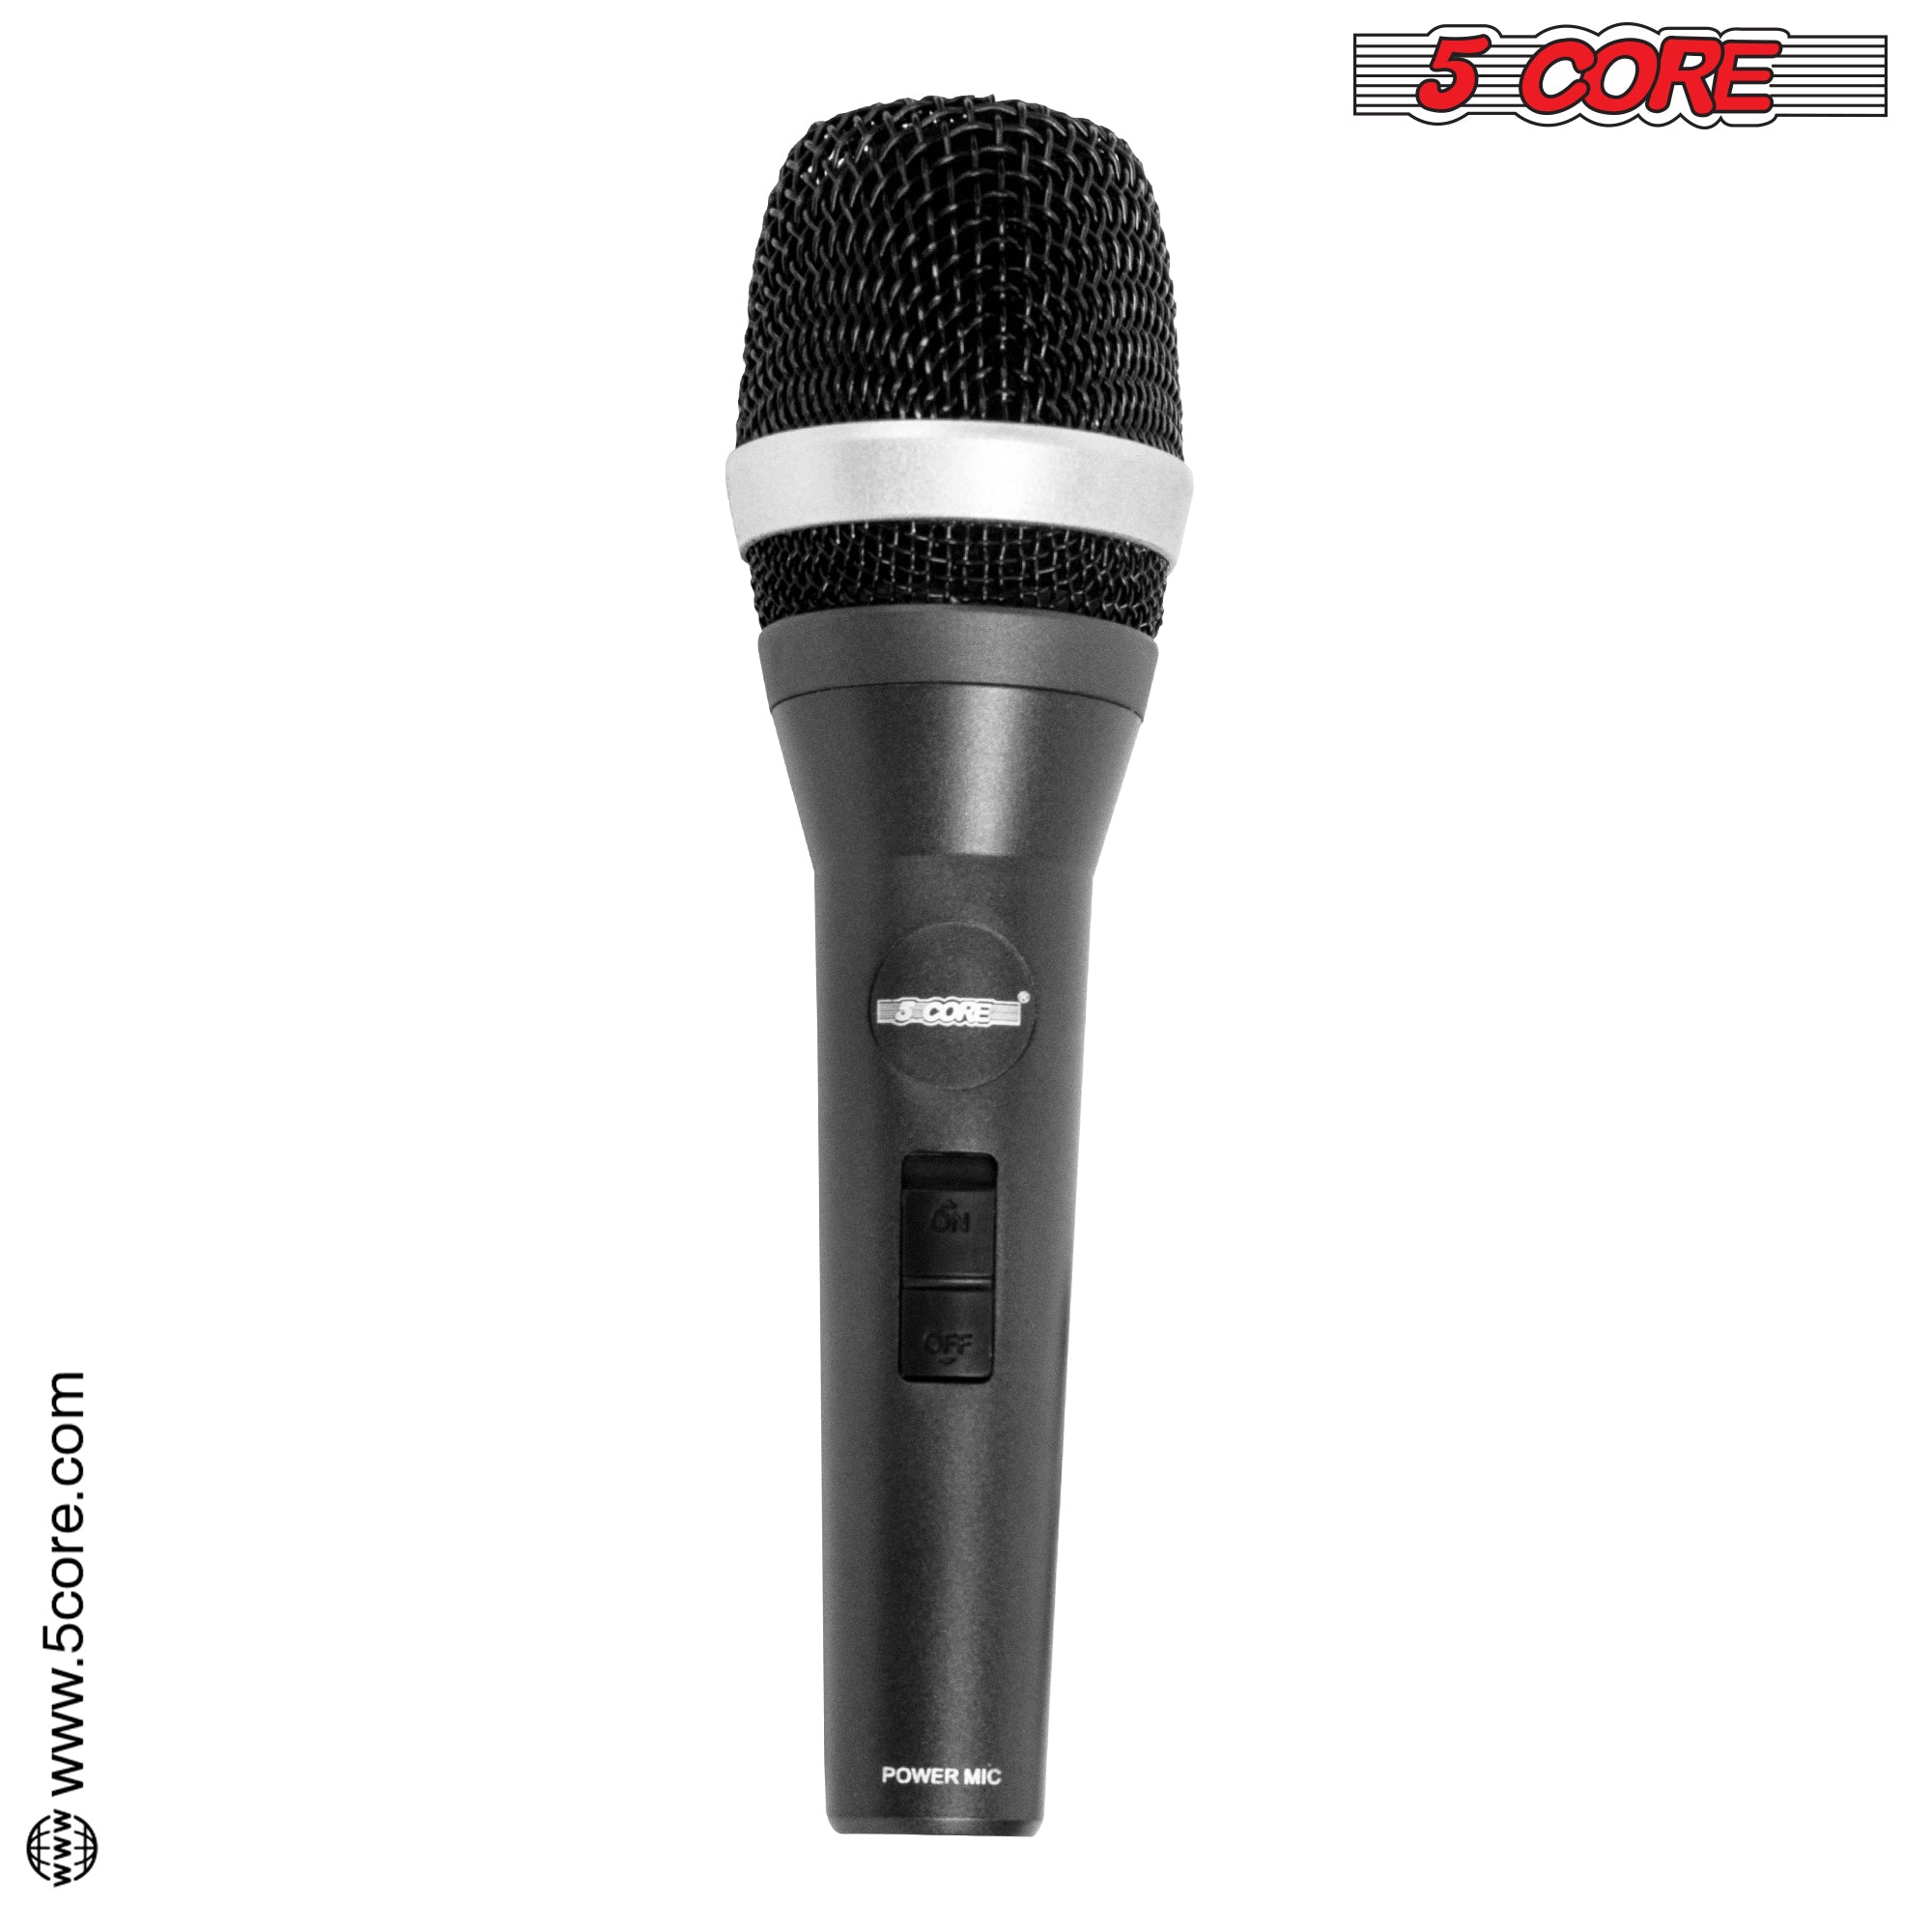 5 Core Microphone 1 Piece Black Karaoke XLR Wired Mic Professional Studio Microfonos w Integrated Pop Filter Dynamic Moving Coil Cardioid Unidirectional Pickup Micrófono for Singing DJ Podcast Speeches Includes Cable Mic Holder Bag- 5C-POWER